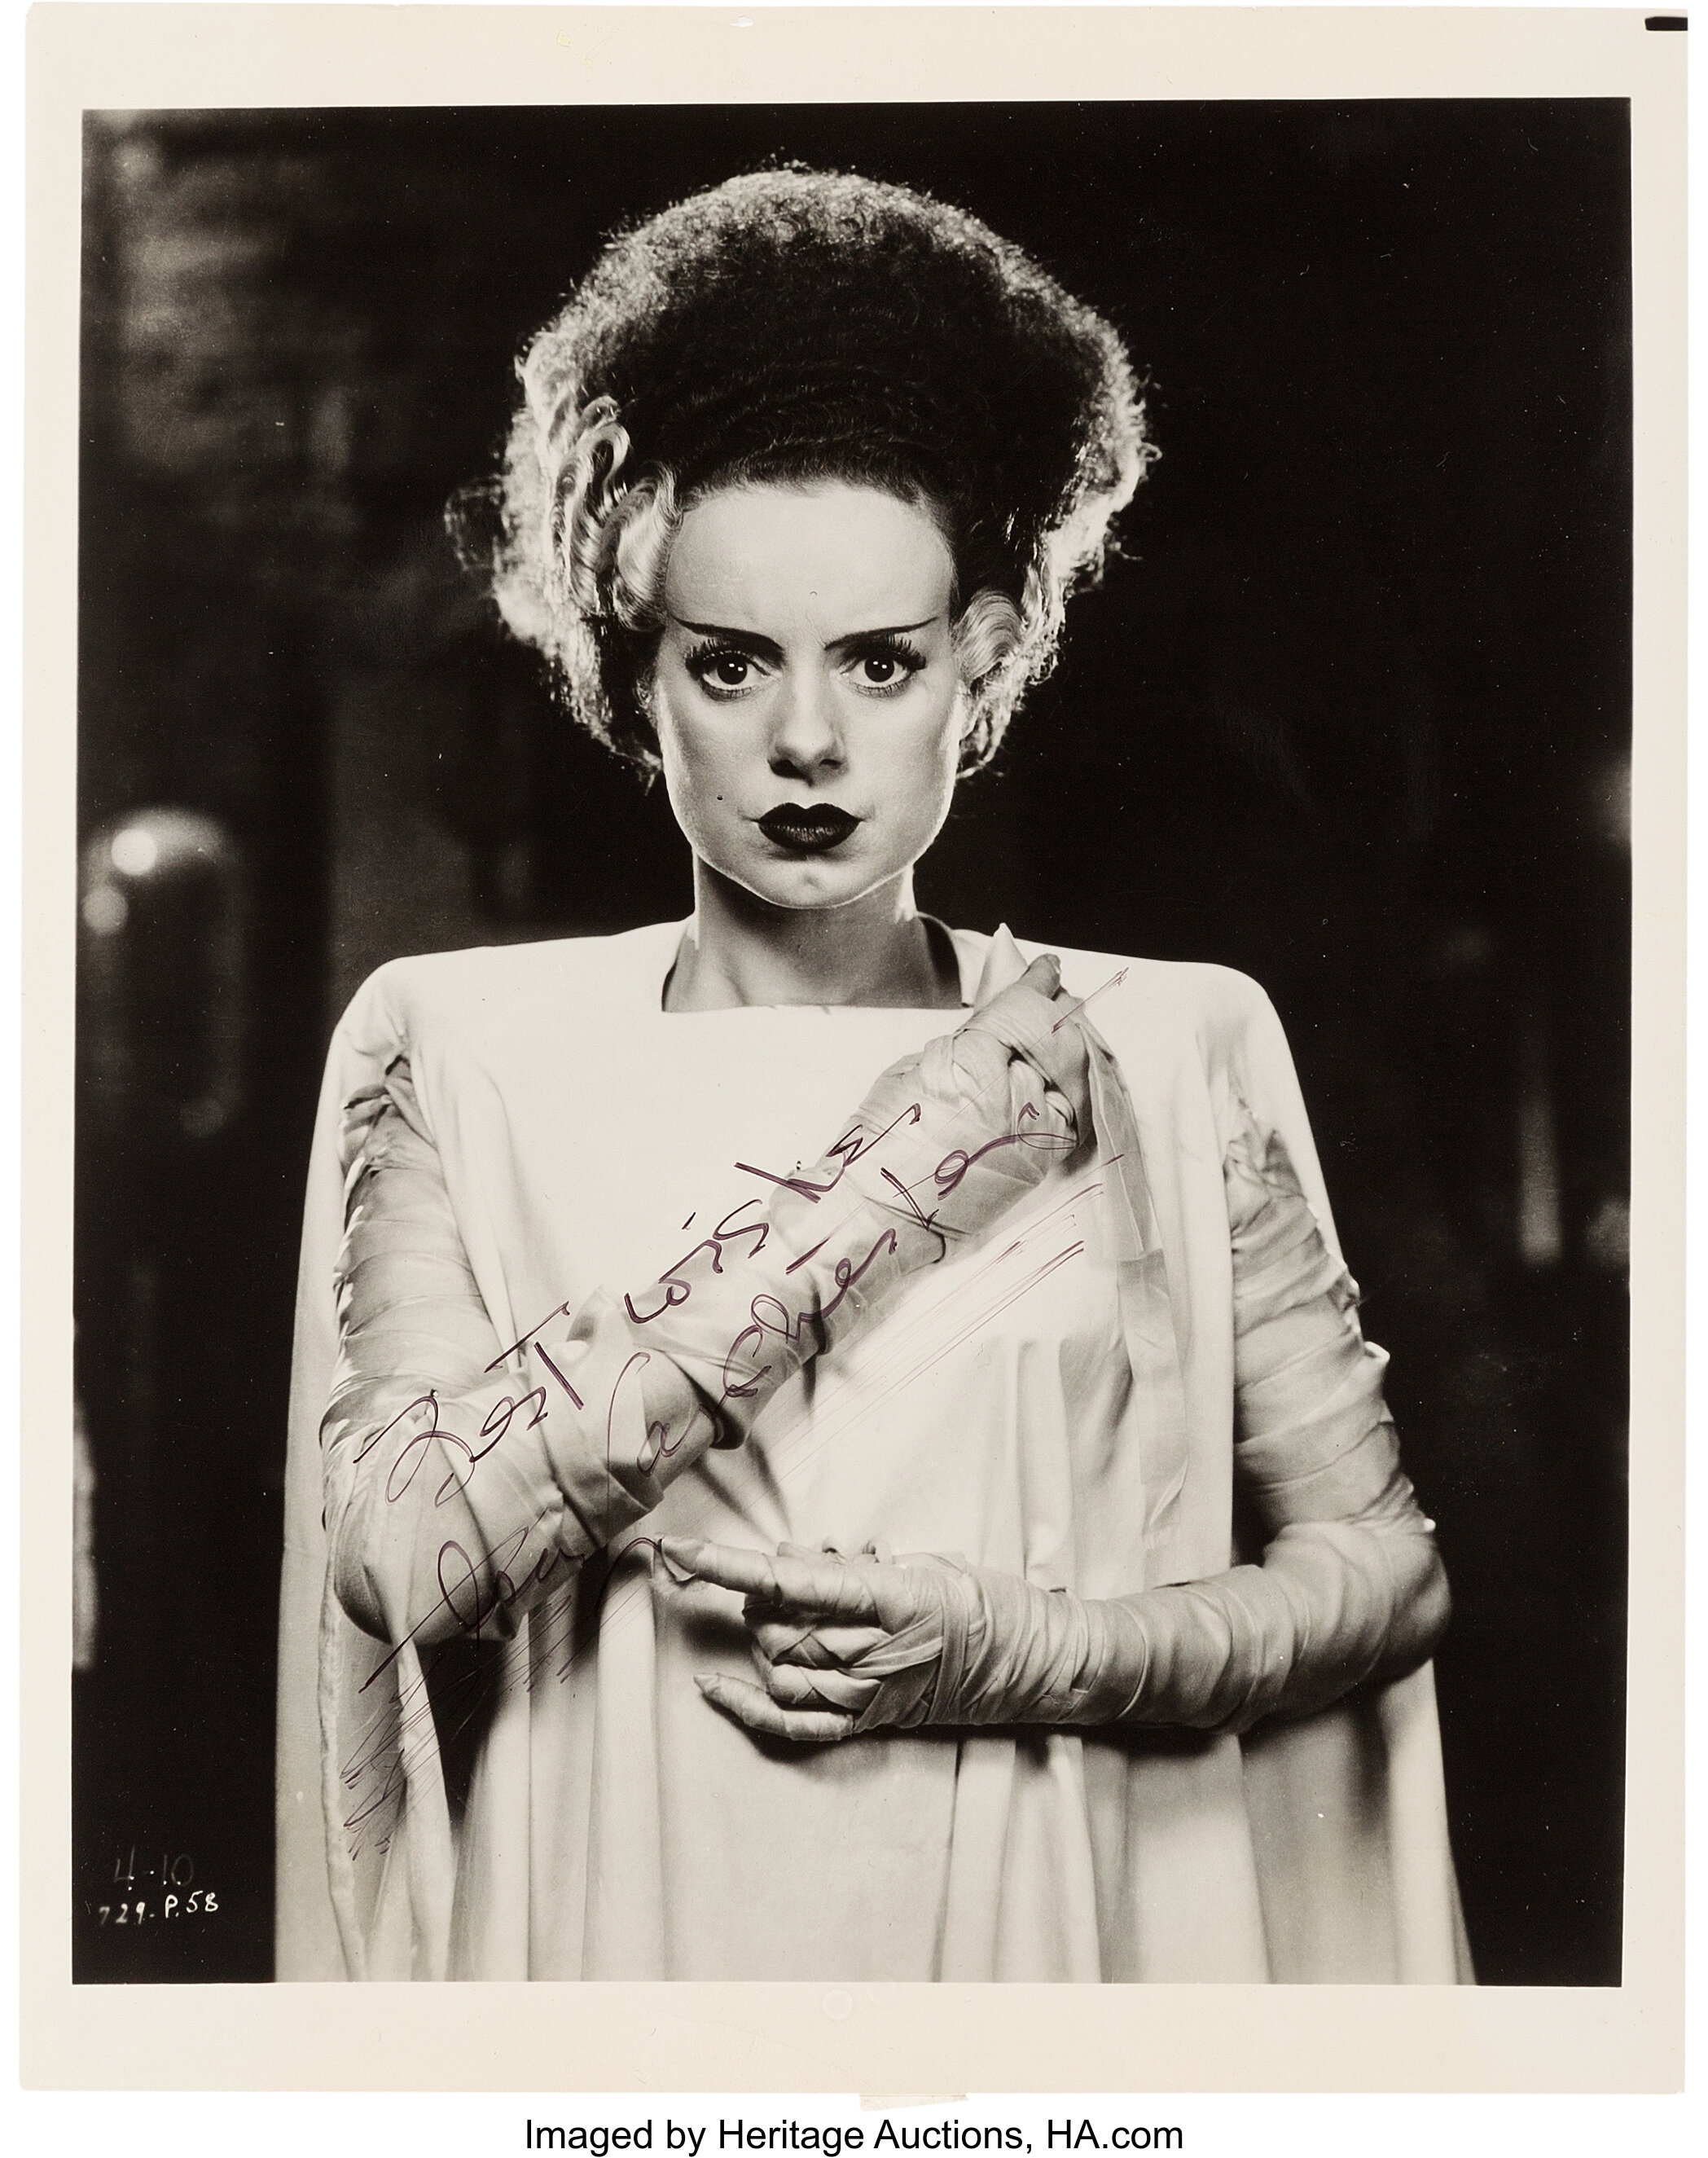 Elsa Lanchester Signed Photo From Bride Of Frankenstein Universal Lot 89022 Heritage Auctions 